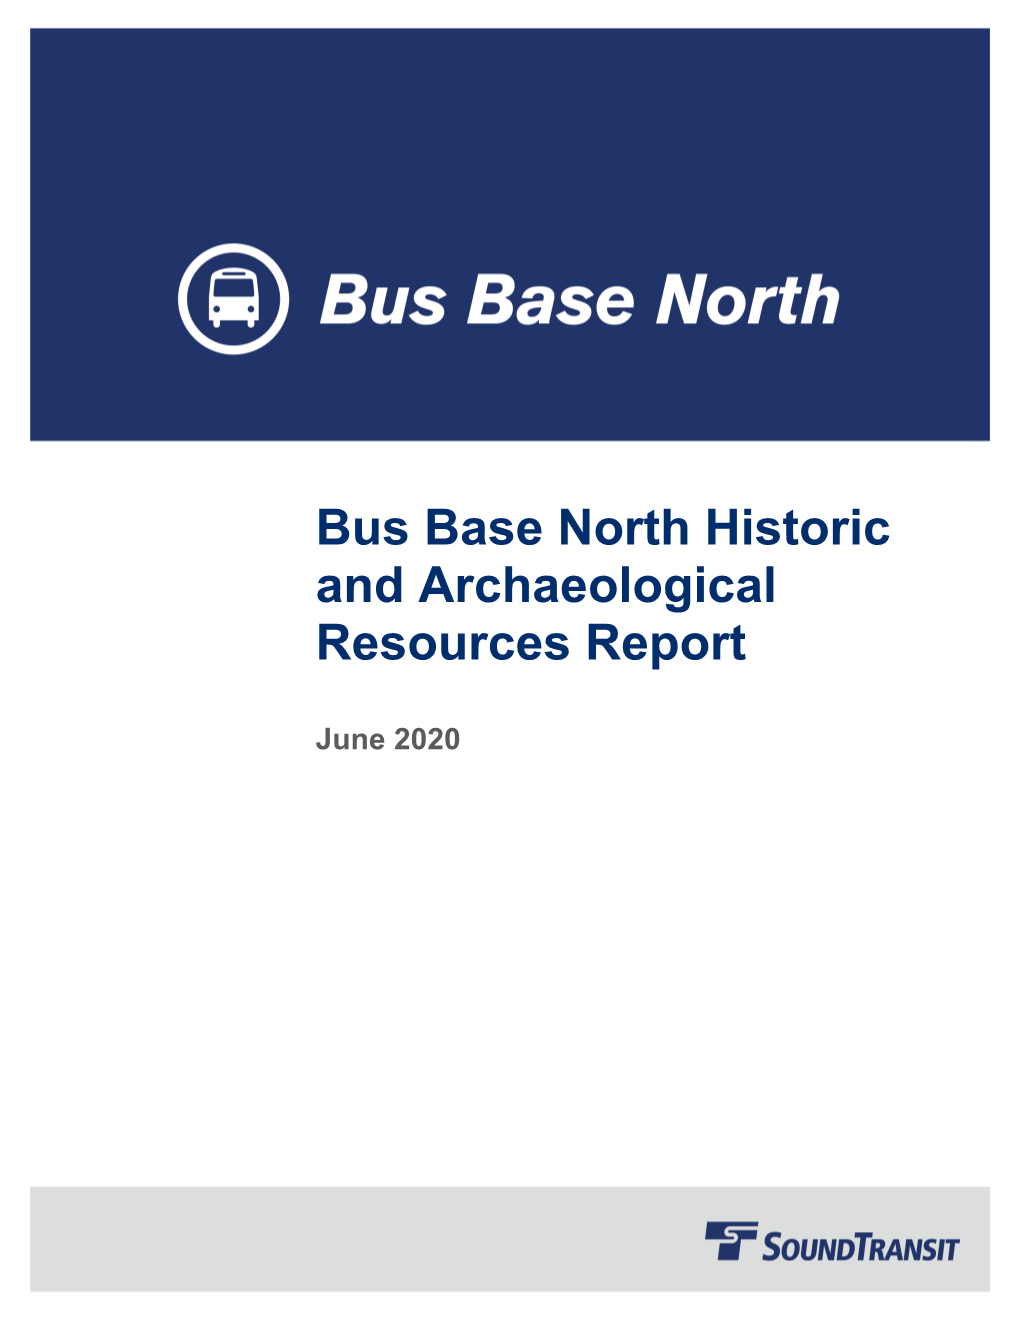 Bus Base North Historic and Archaeological Resources Report